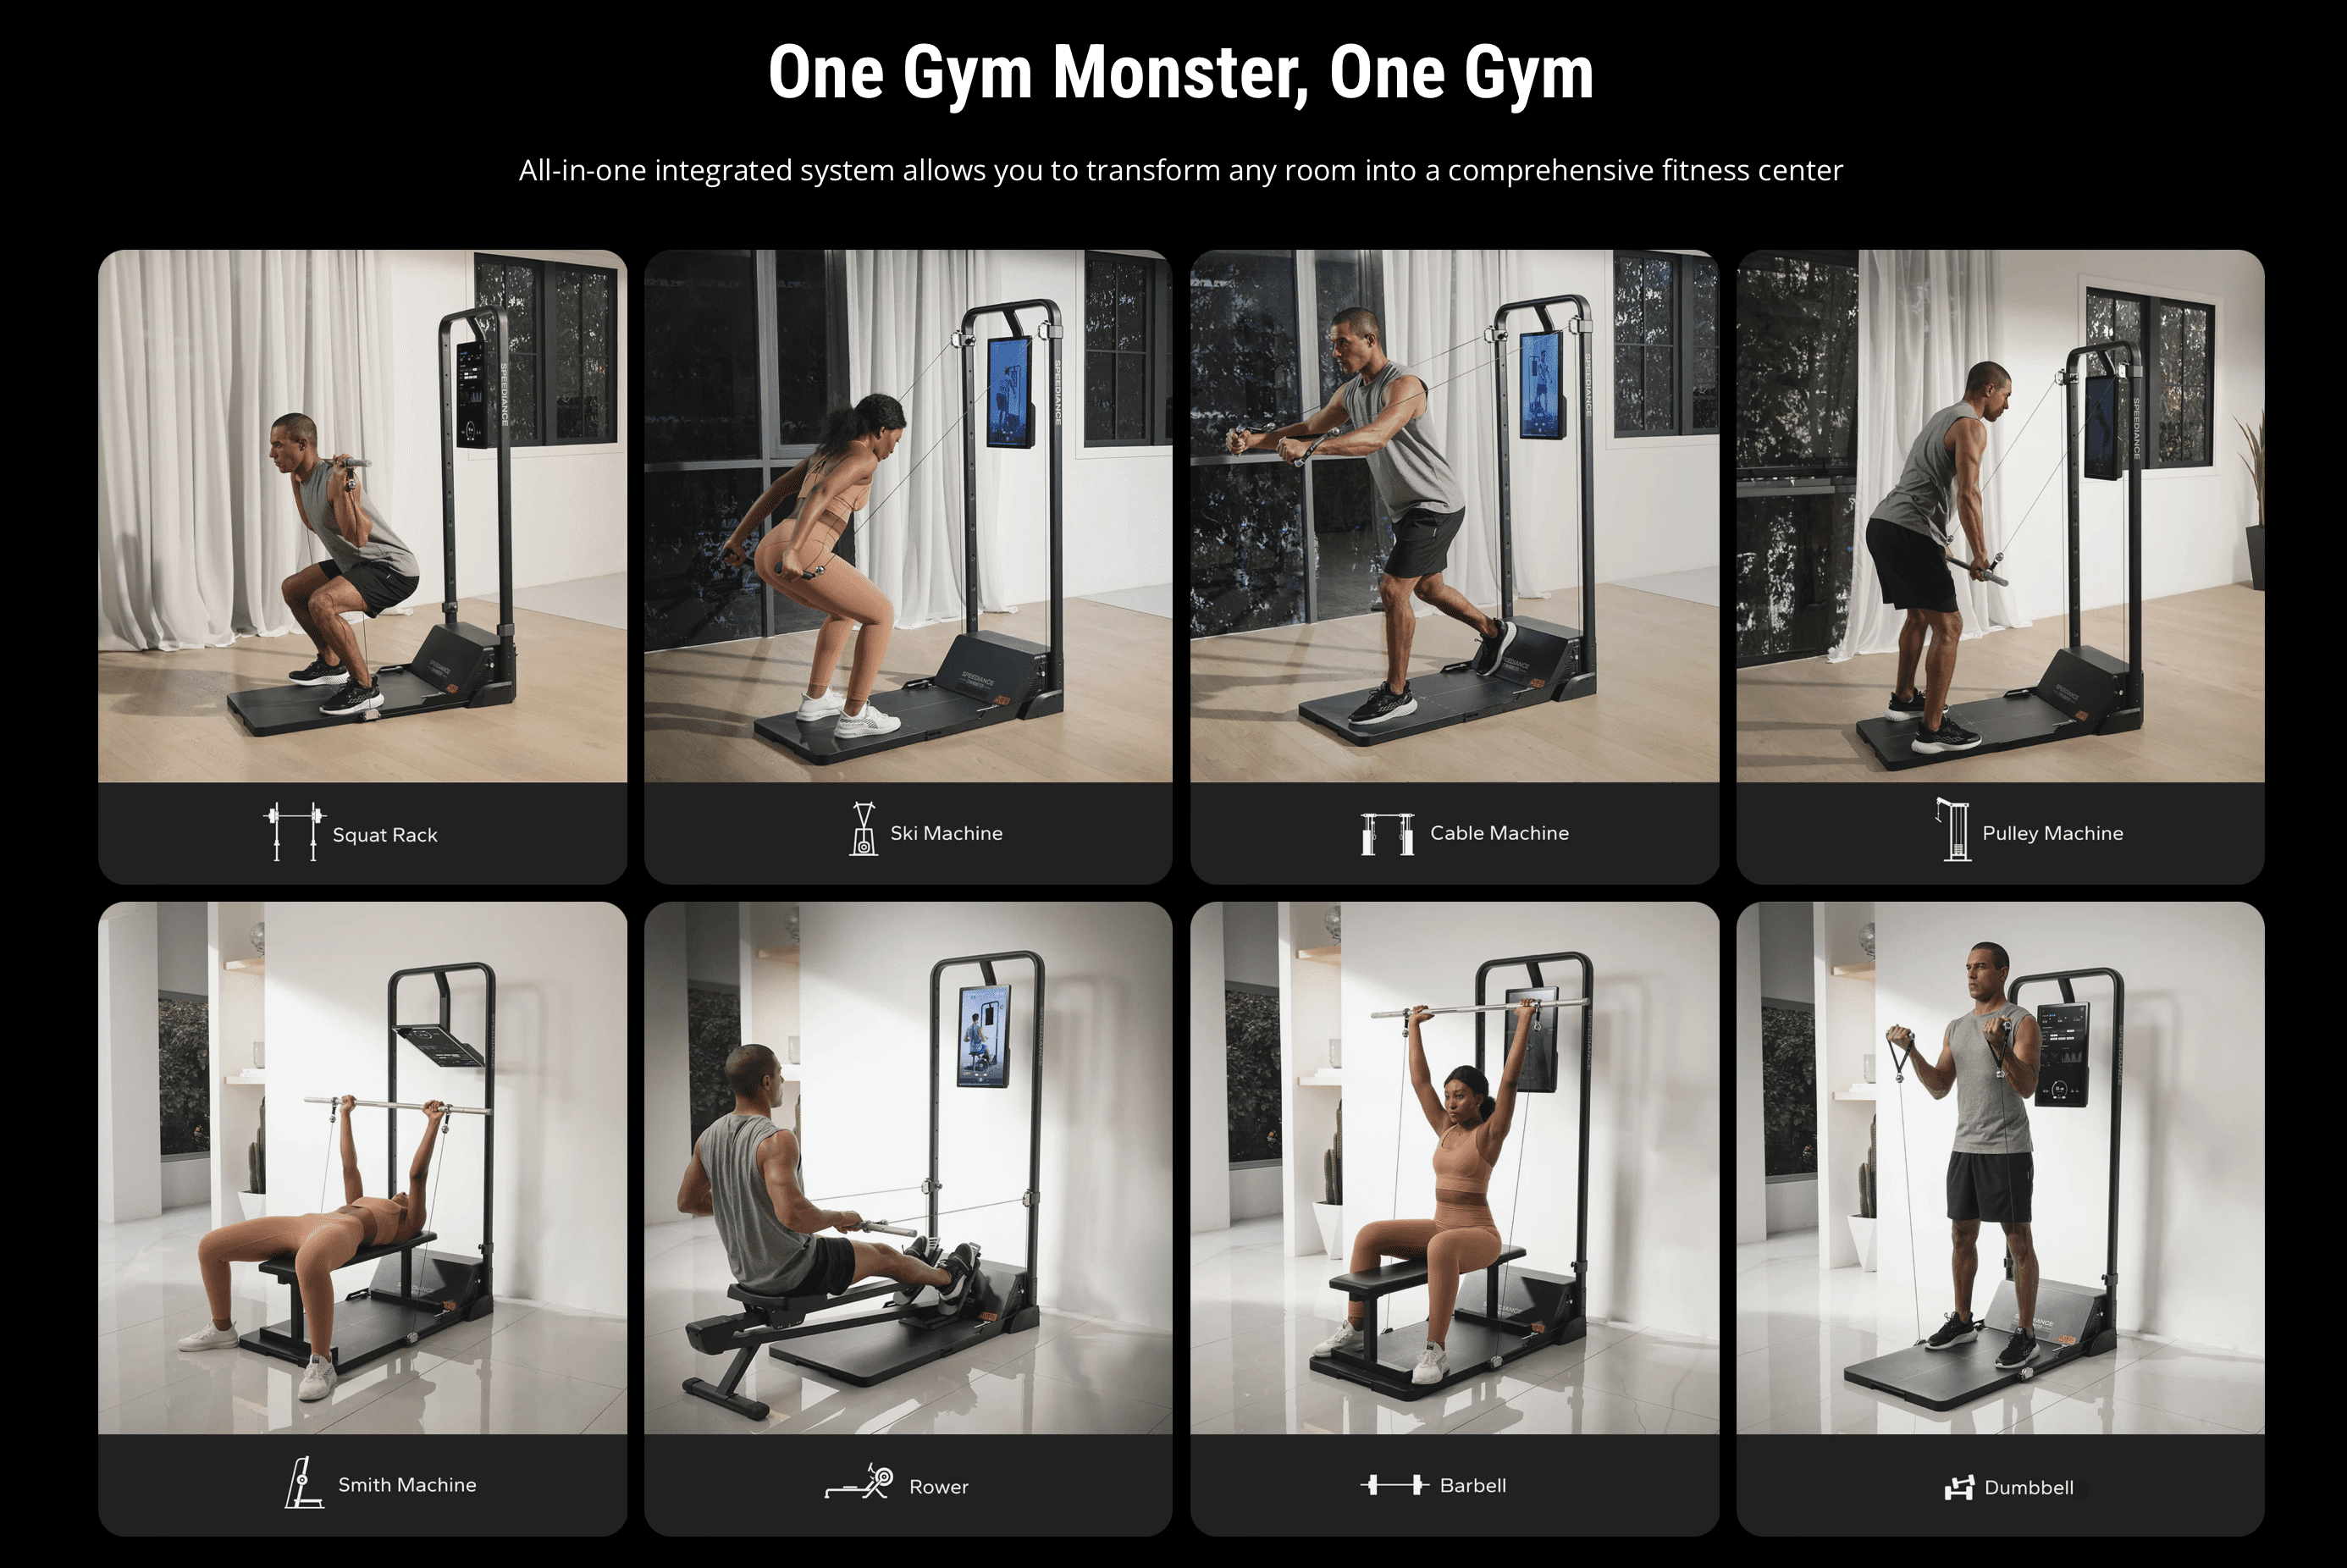 My Minimal 20-Minute Full-Body Workout With Speediance Gym Monster (With Template Link)